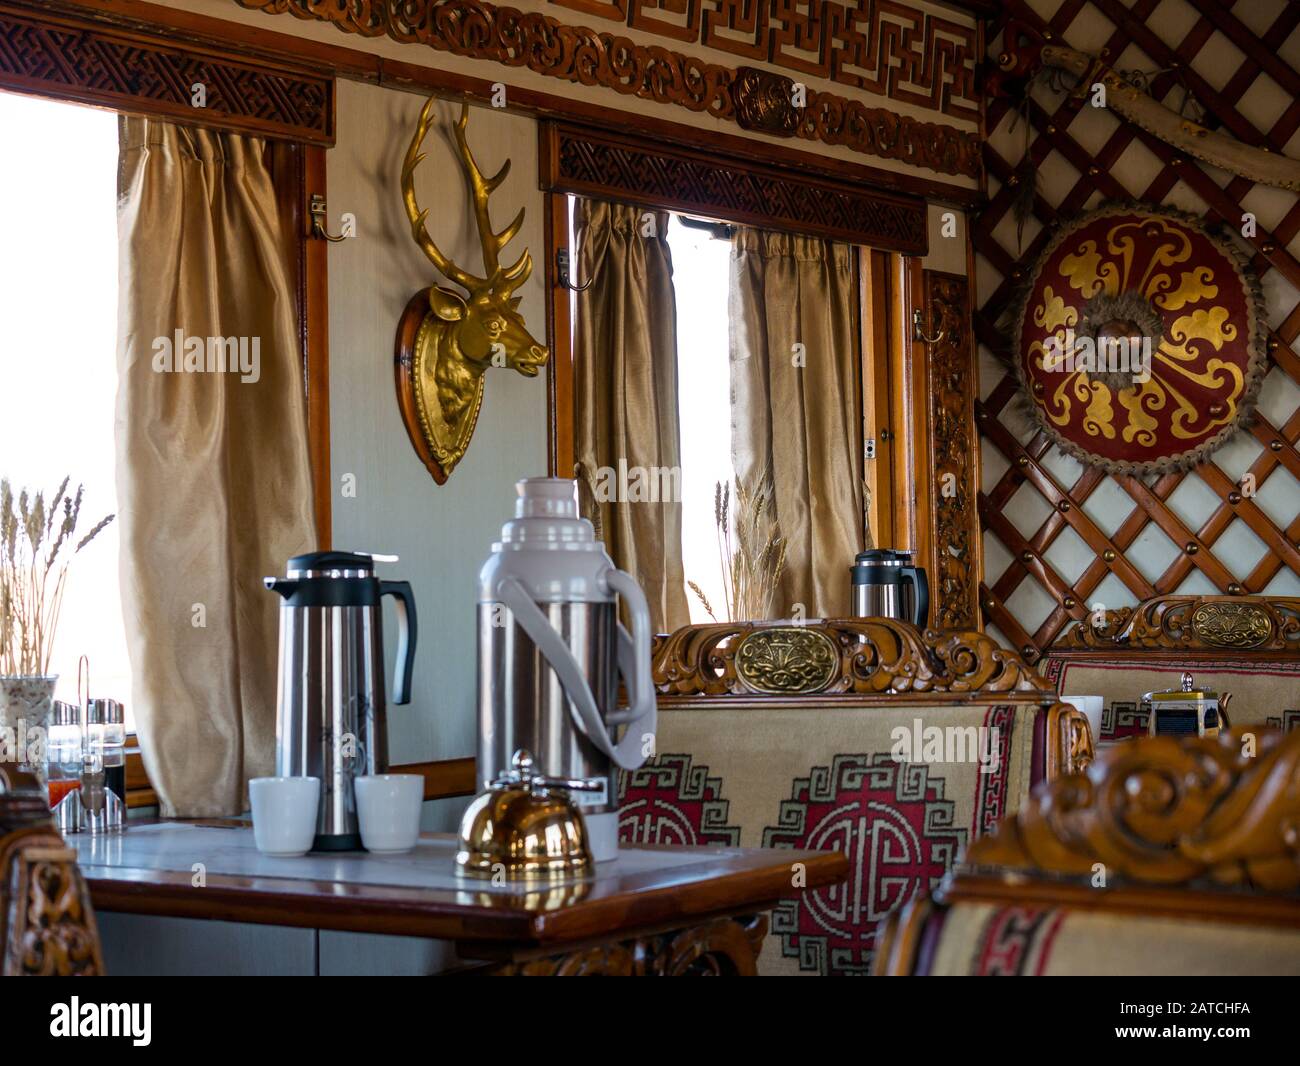 Interior of traditionally decorated Trans-Mongolian Express train dining carriage, Mongolia, Asia Stock Photo